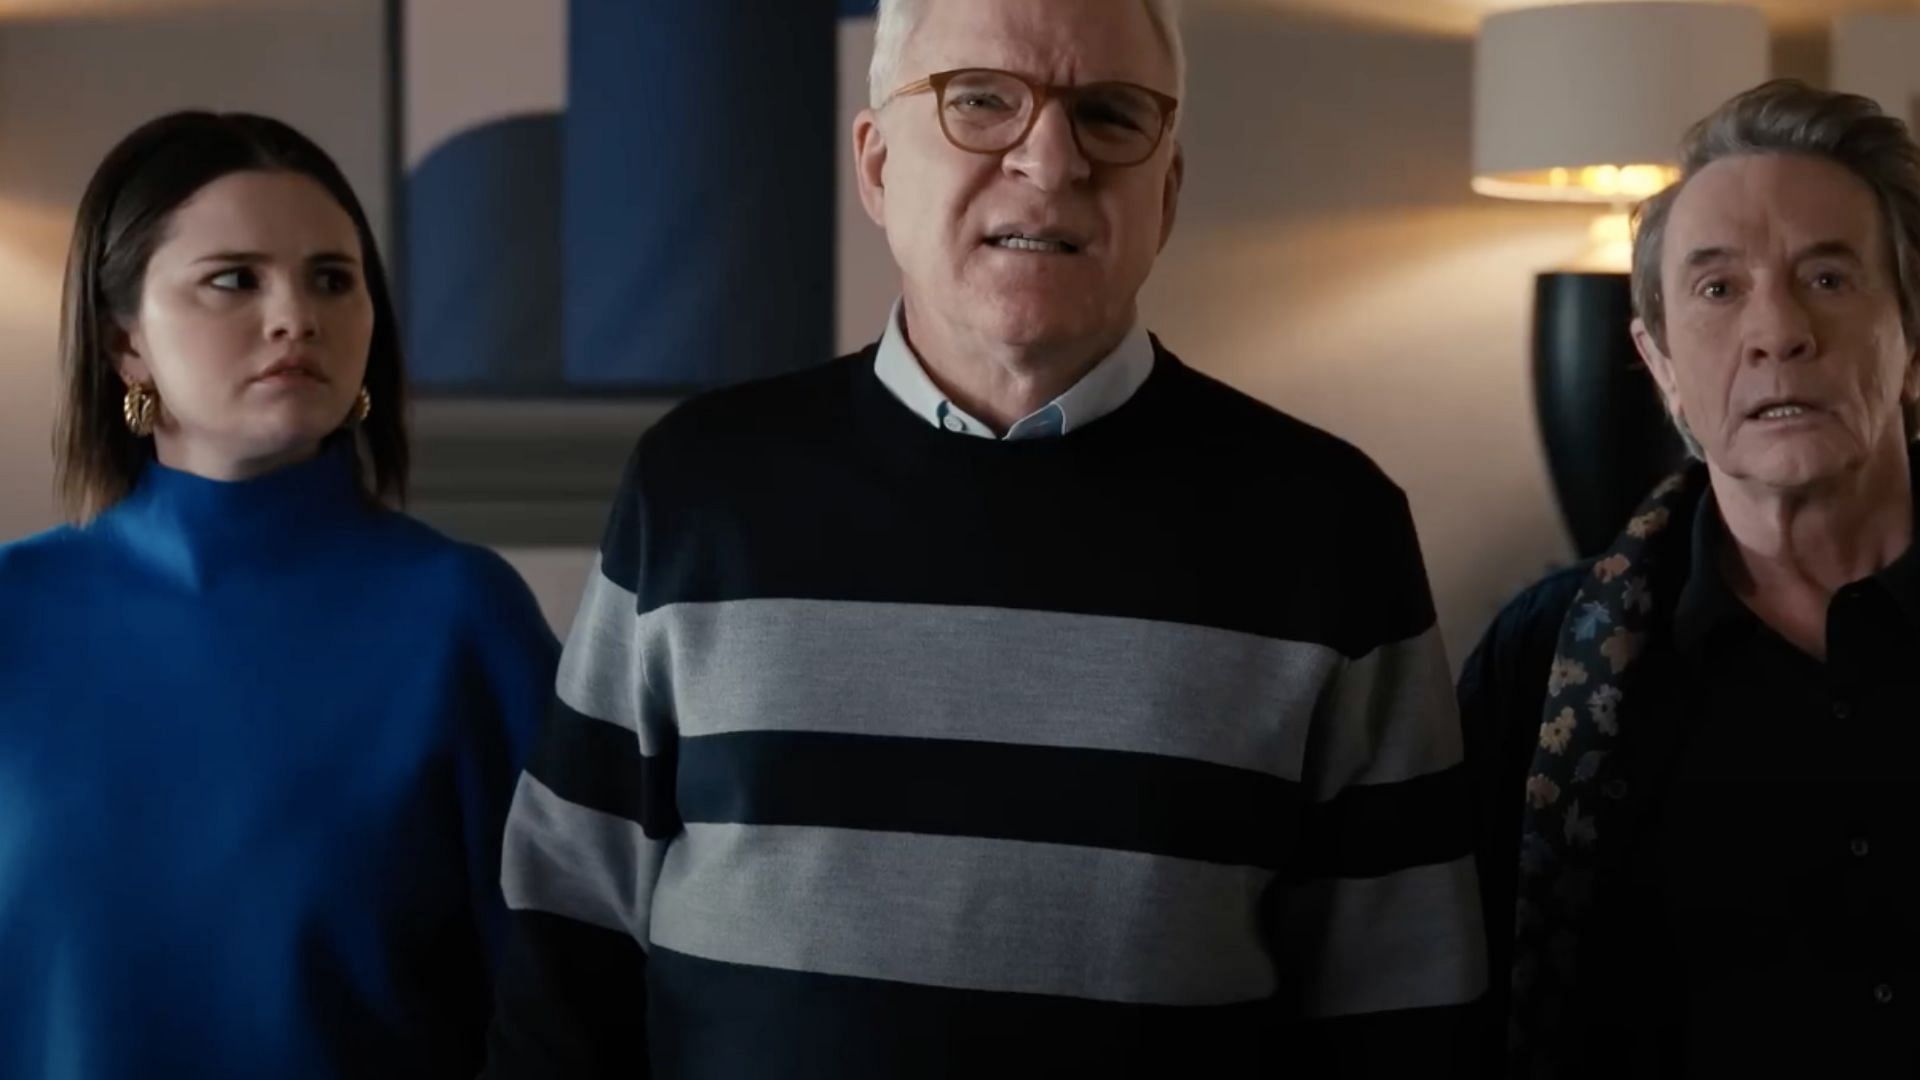 Selena Gomez, Steve Martin, and Martin Short in Only Murders in the Building (Image via Hulu/ YouTube)